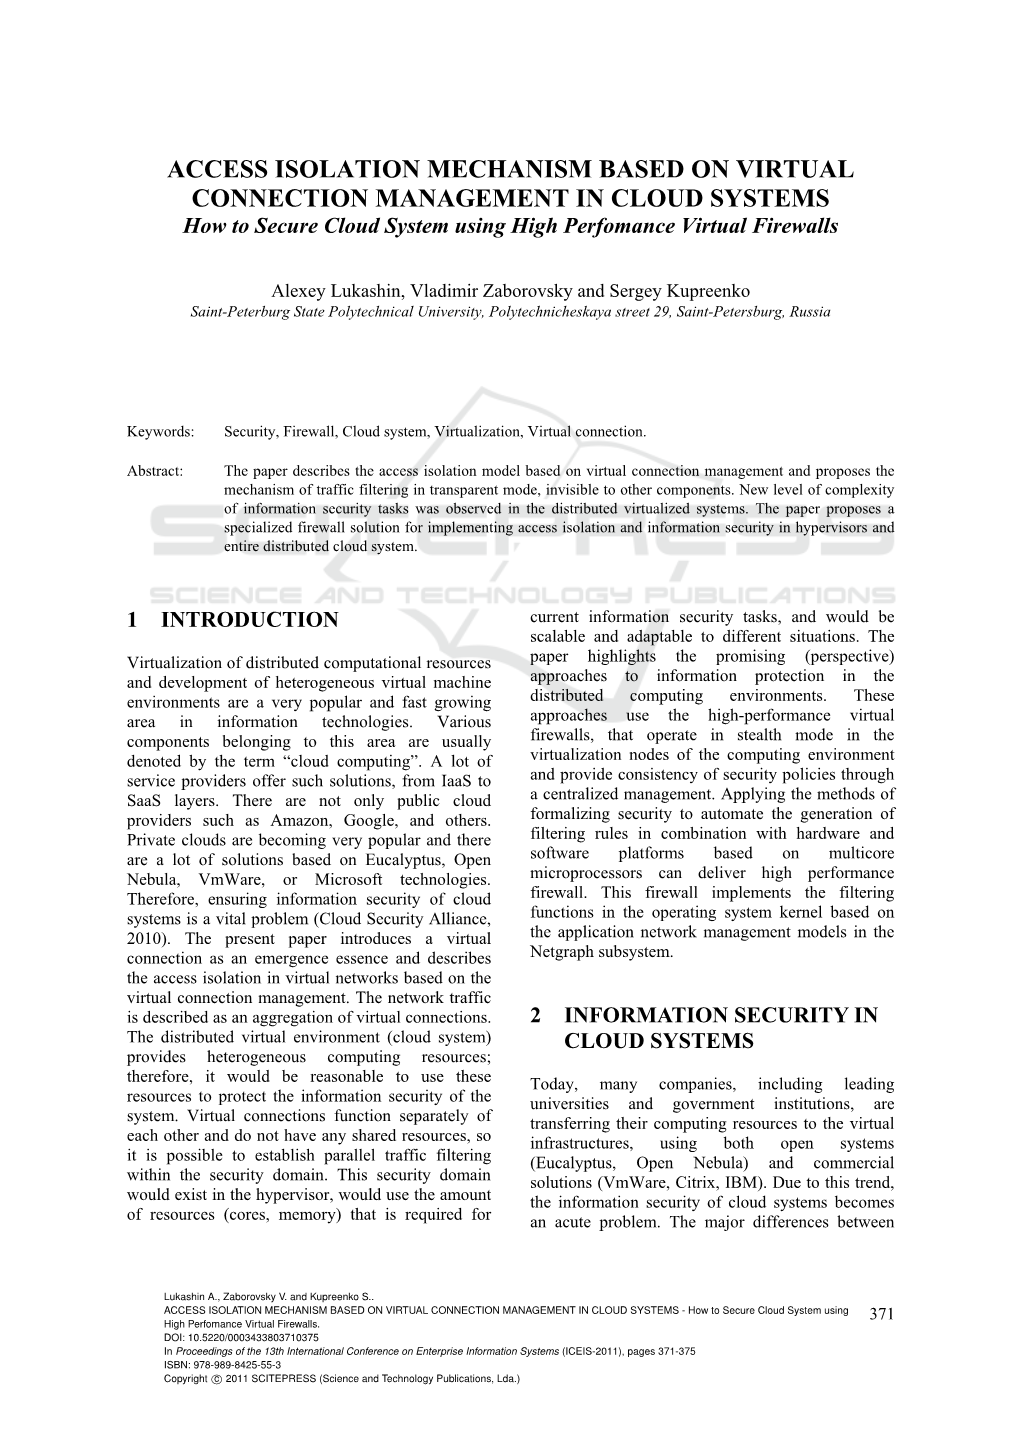 ACCESS ISOLATION MECHANISM BASED on VIRTUAL CONNECTION MANAGEMENT in CLOUD SYSTEMS How to Secure Cloud System Using High Perfomance Virtual Firewalls